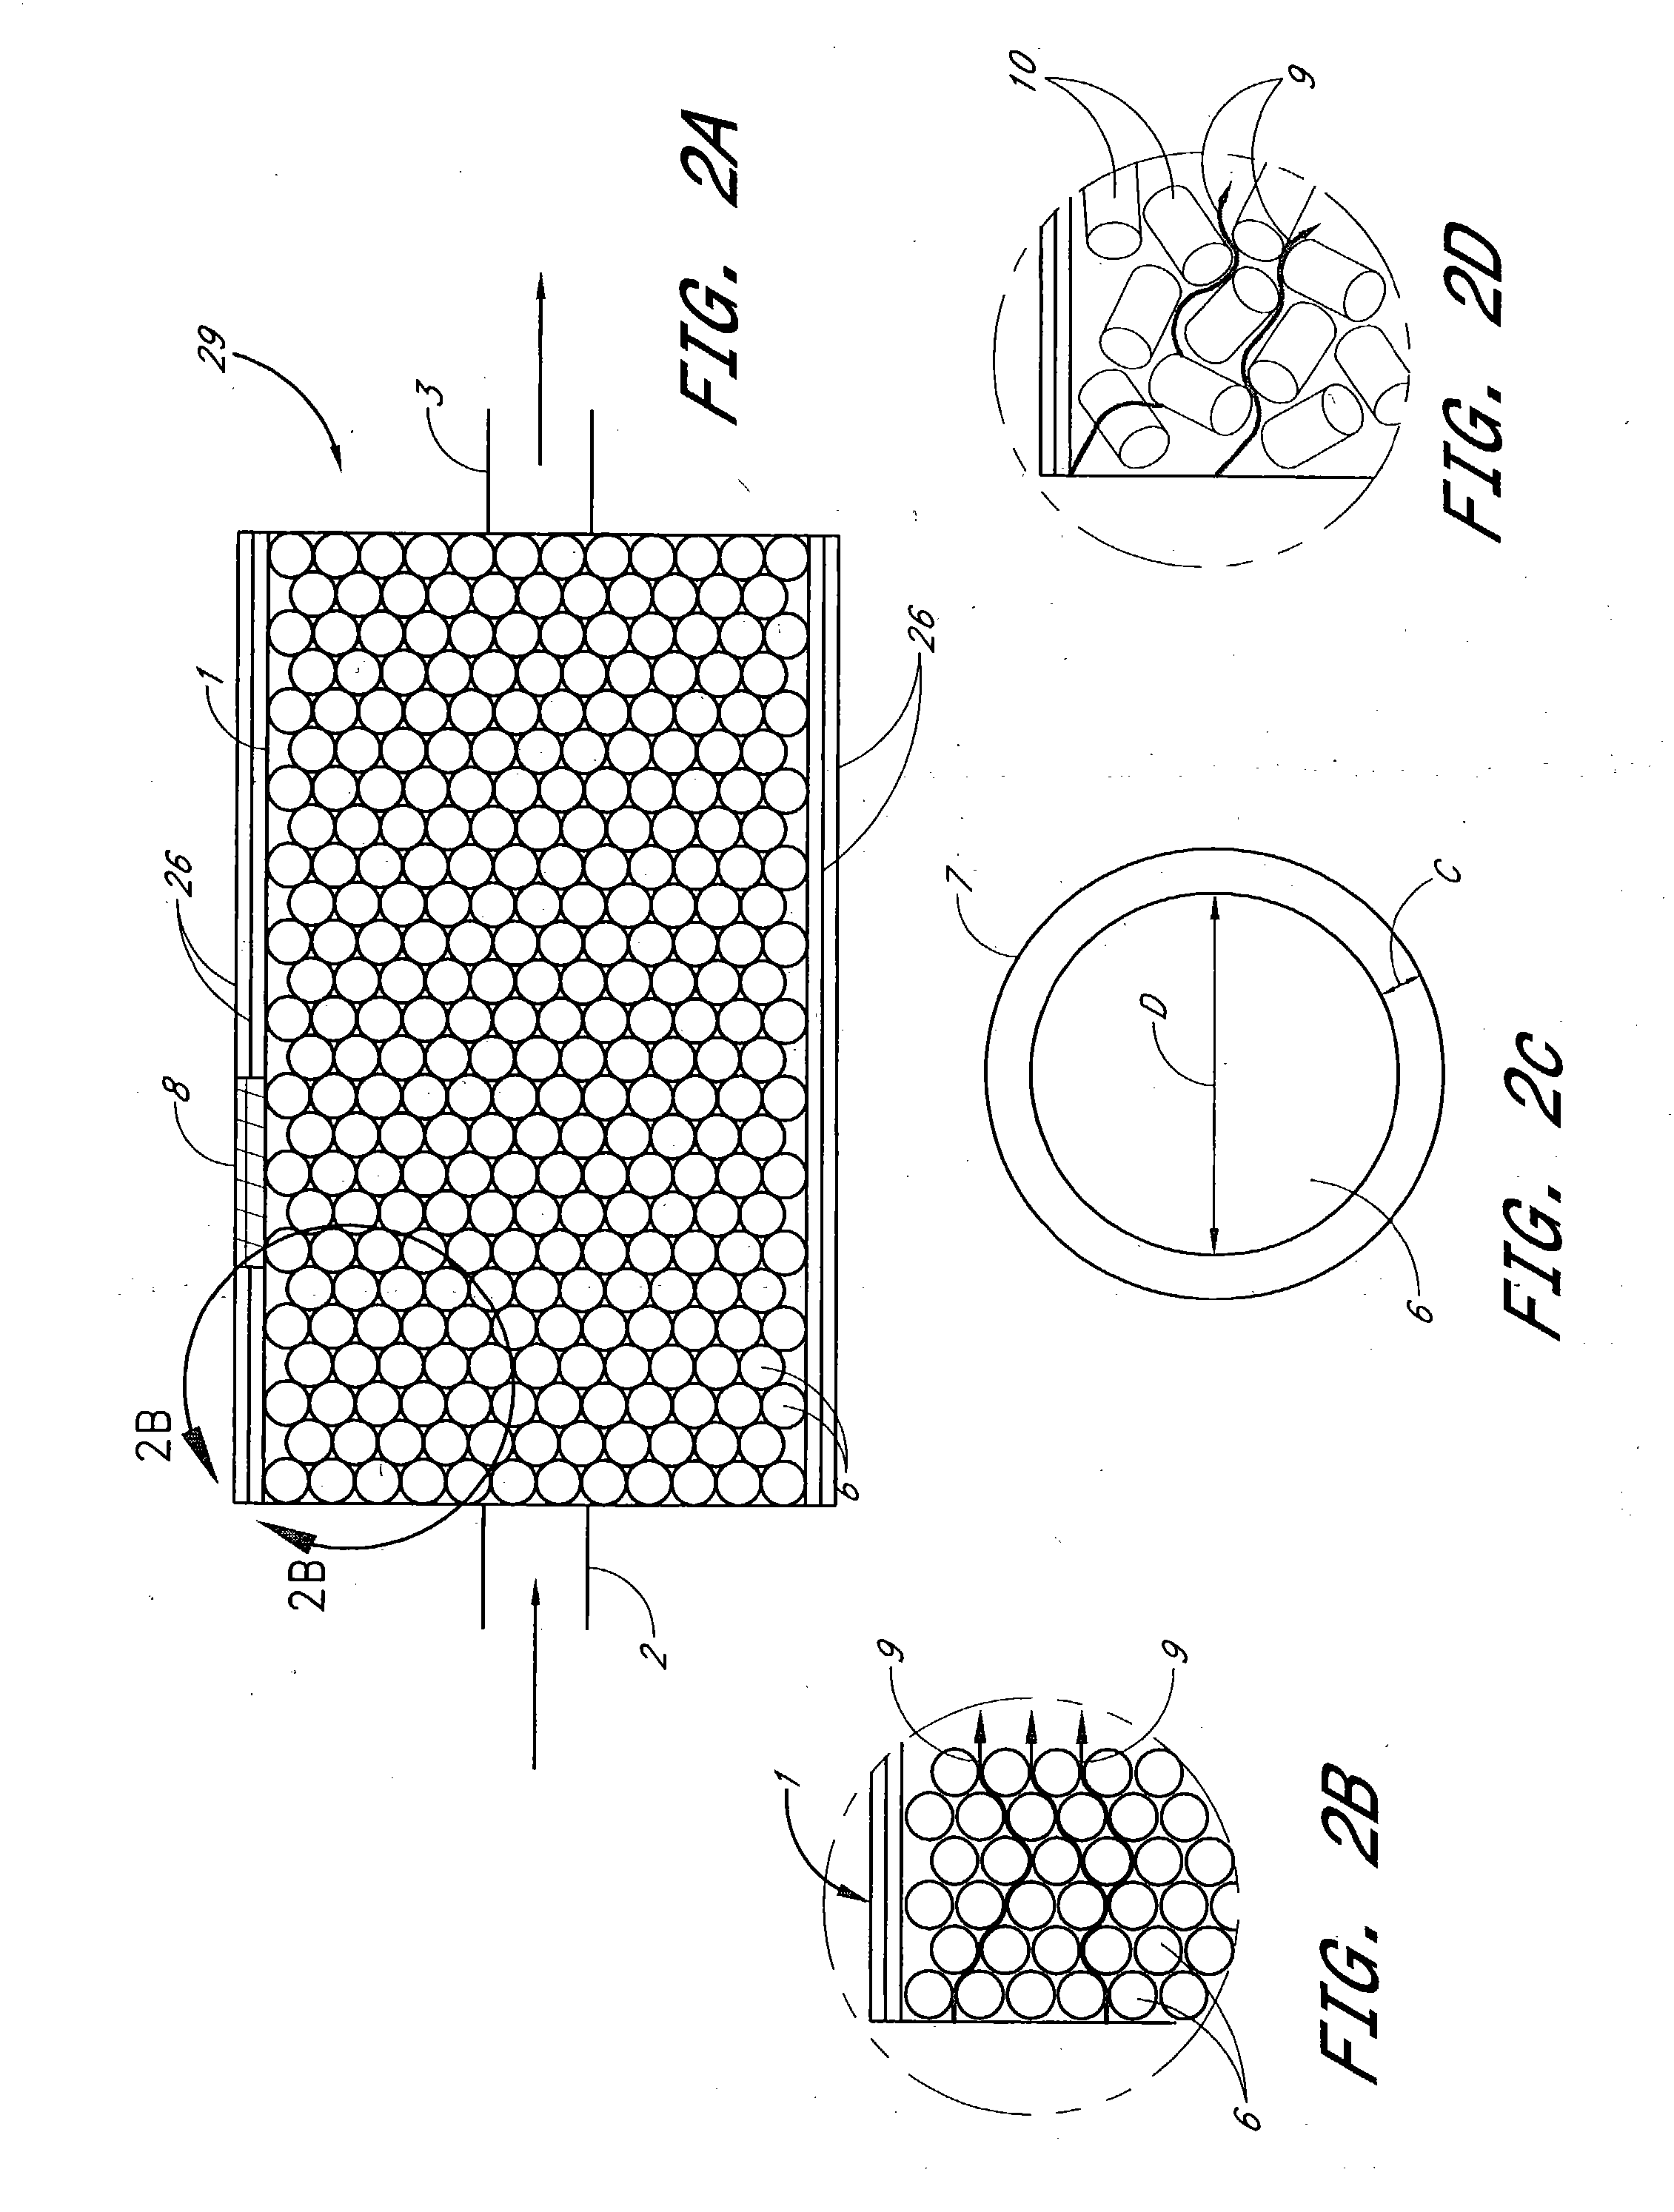 Sublimation bed employing carrier gas guidance structures